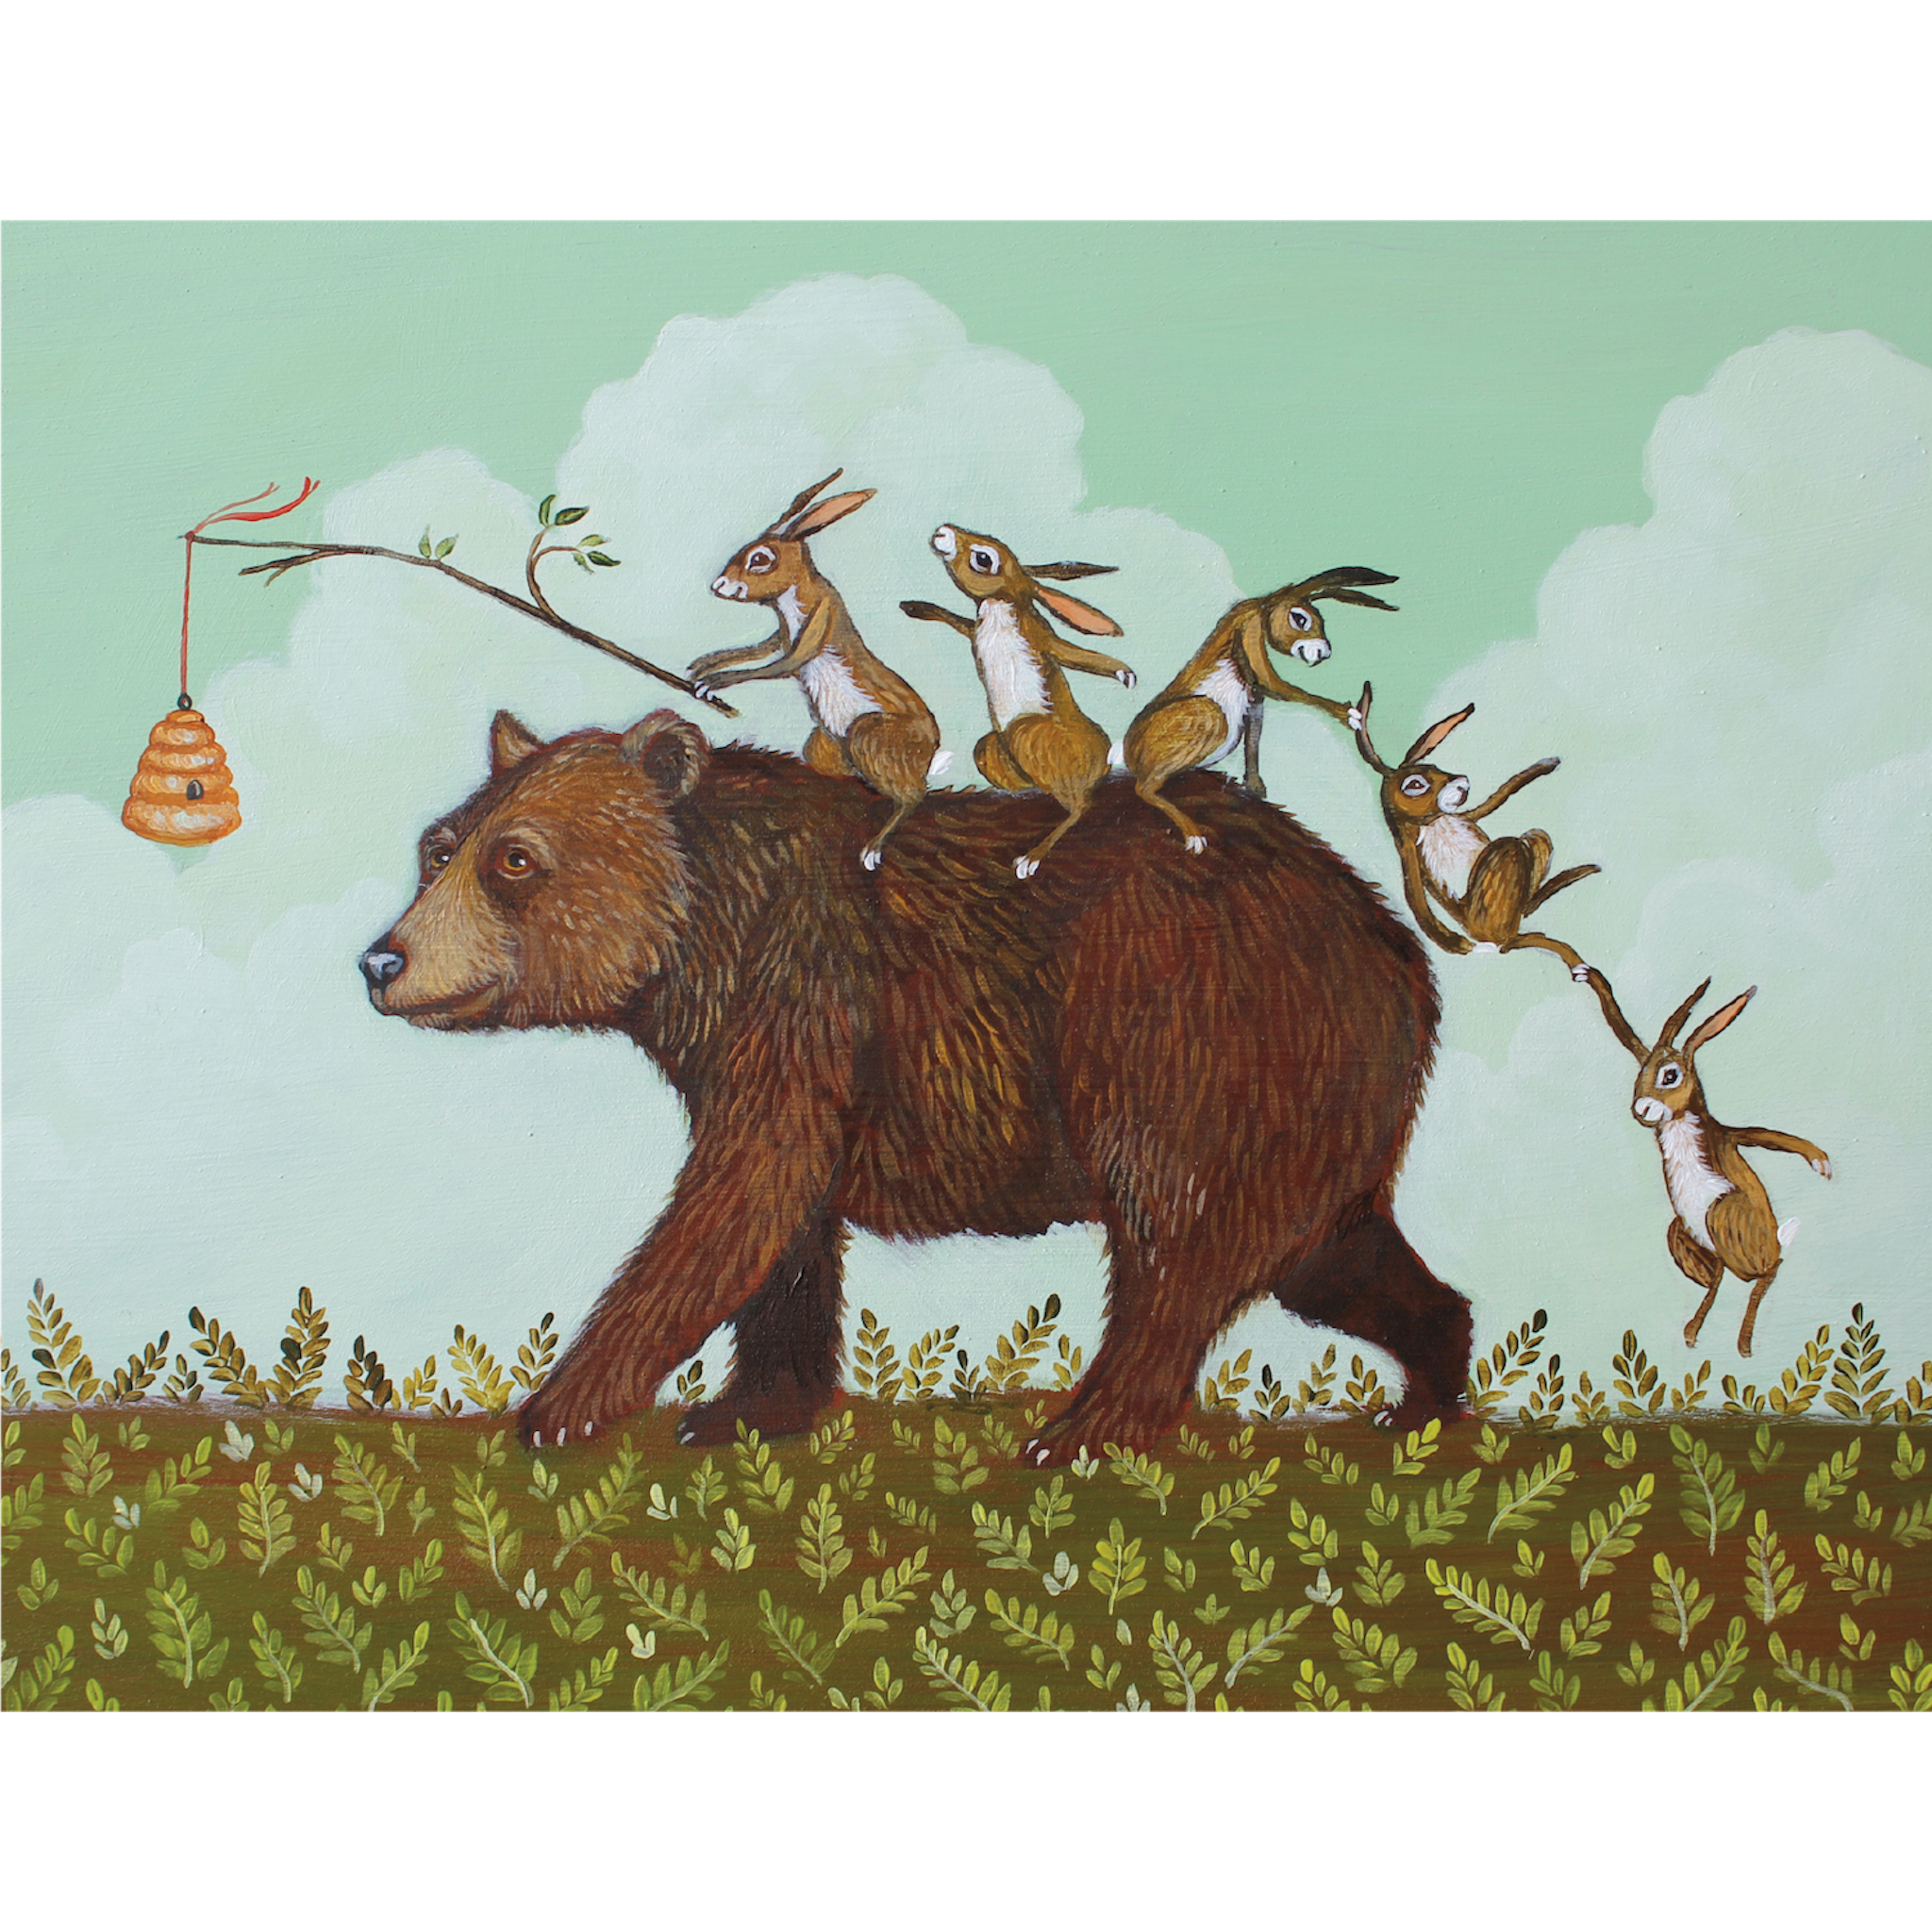 An original artwork by Elizabeth Foster featuring a bear with rabbits riding on his back. Perfect for the One Sweet Ride Card gift from Hester &amp; Cook.